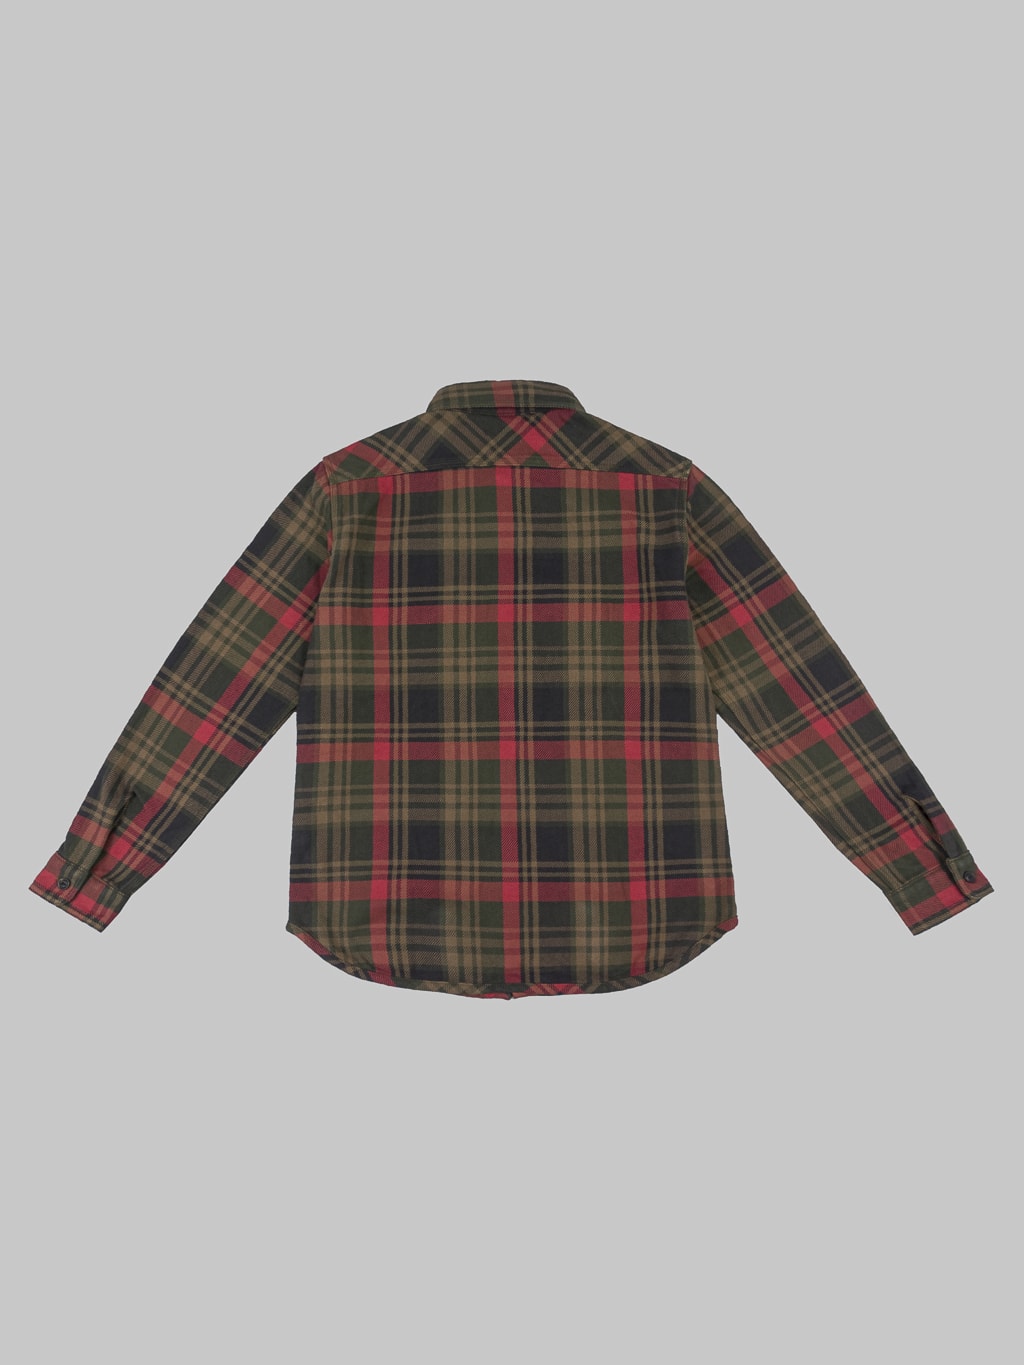 ues extra heavy selvedge flannel shirt red  100 cotton